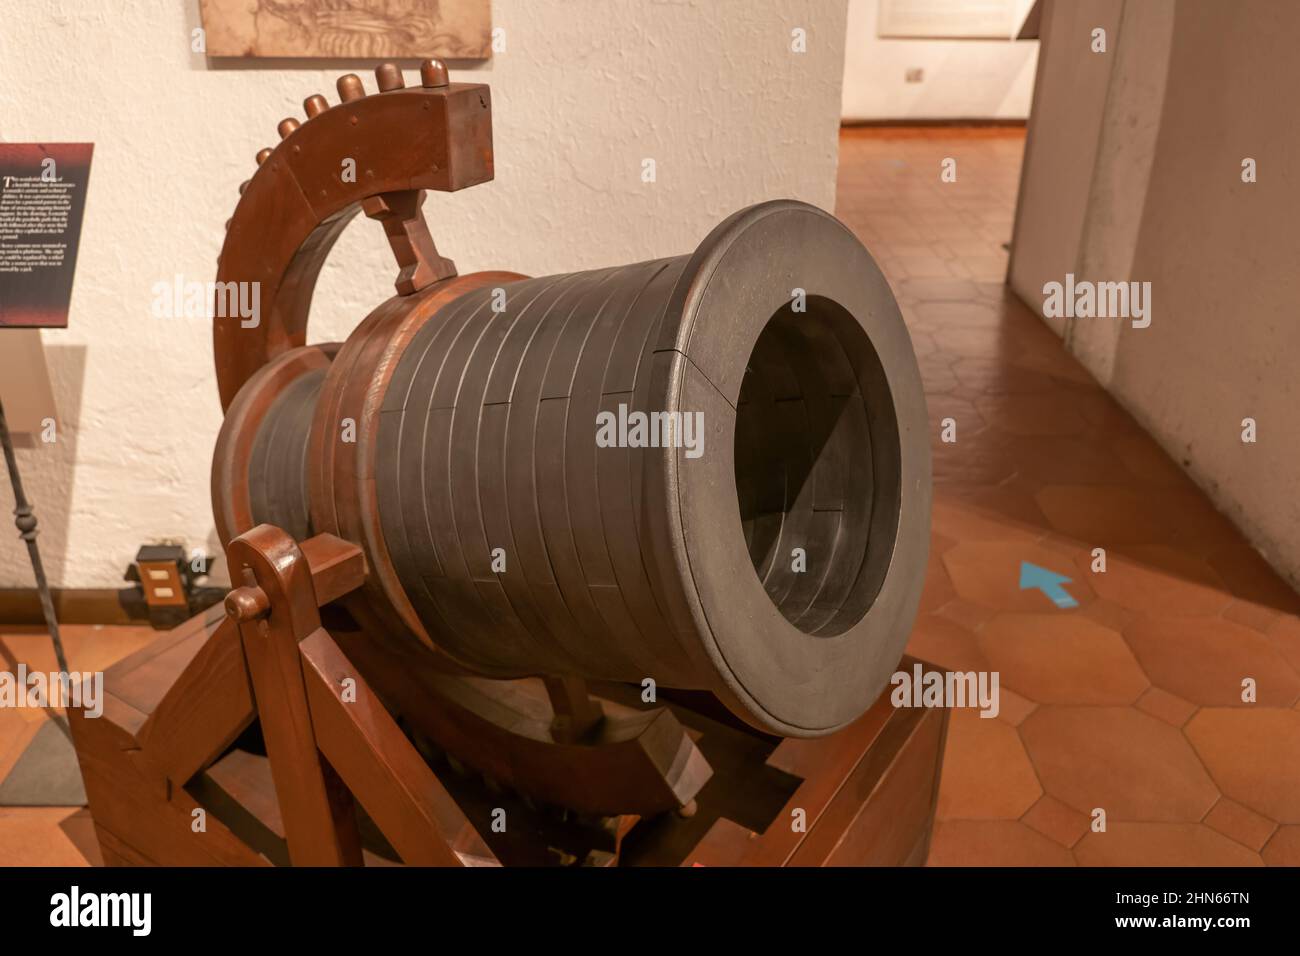 Heavy cannon with angle of fire regulated by a wheel, based on Leonardo’s drawing, Museum Leonardo Da Vinci in Rome, Italy. Stock Photo